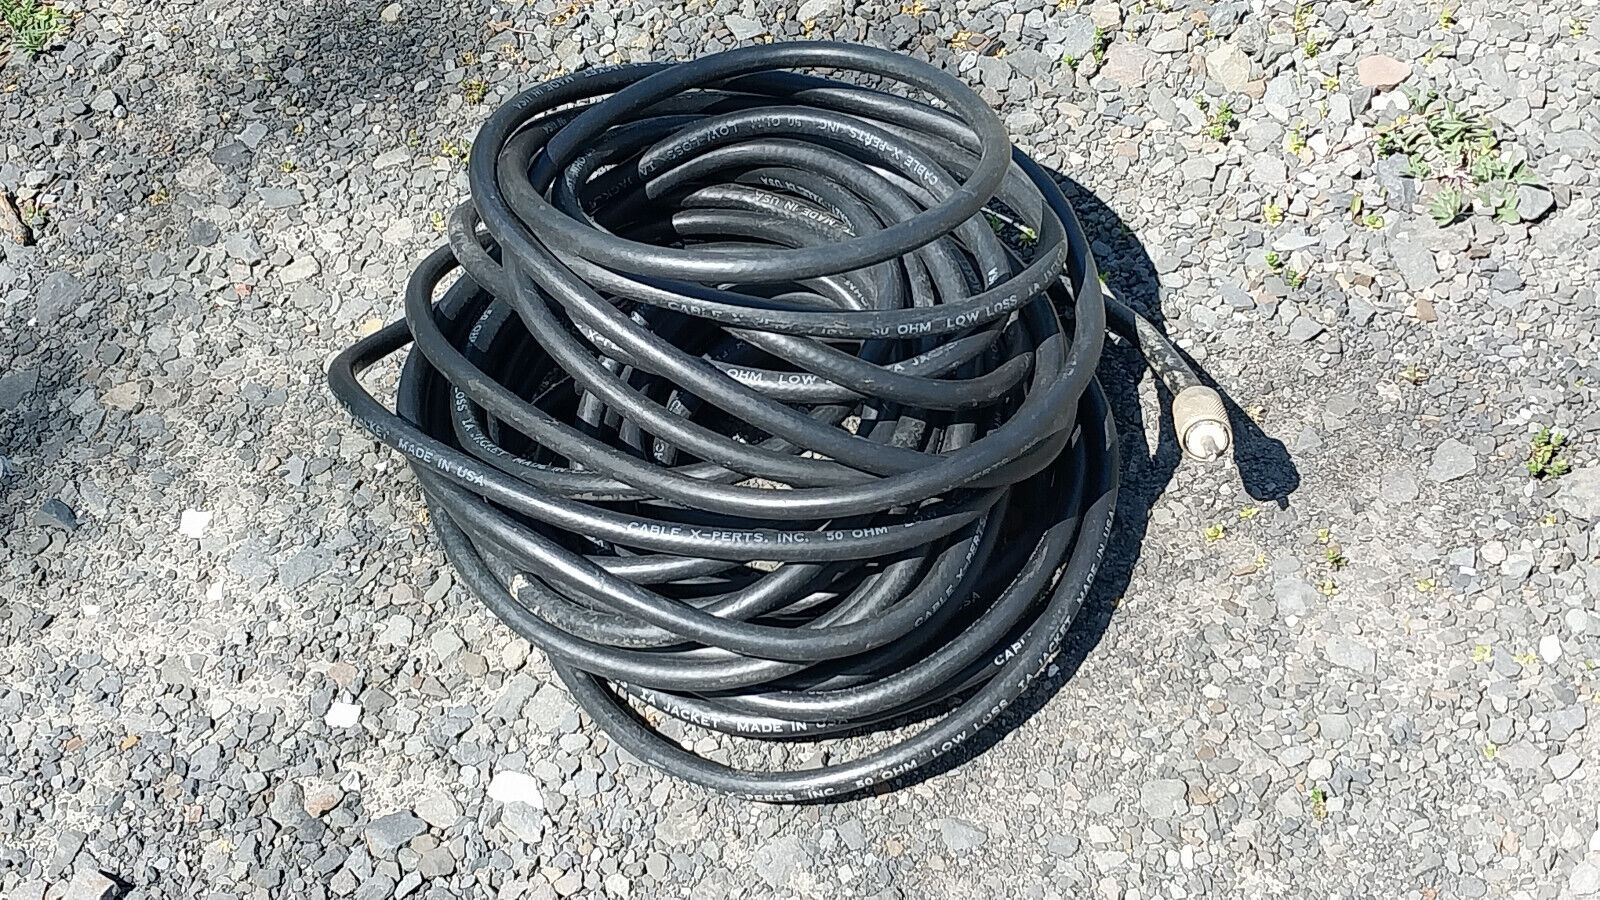 Nice 50+ ft. RG-8 Coax Cable & Connectors / Old Vintage Ham Radio Transmitter